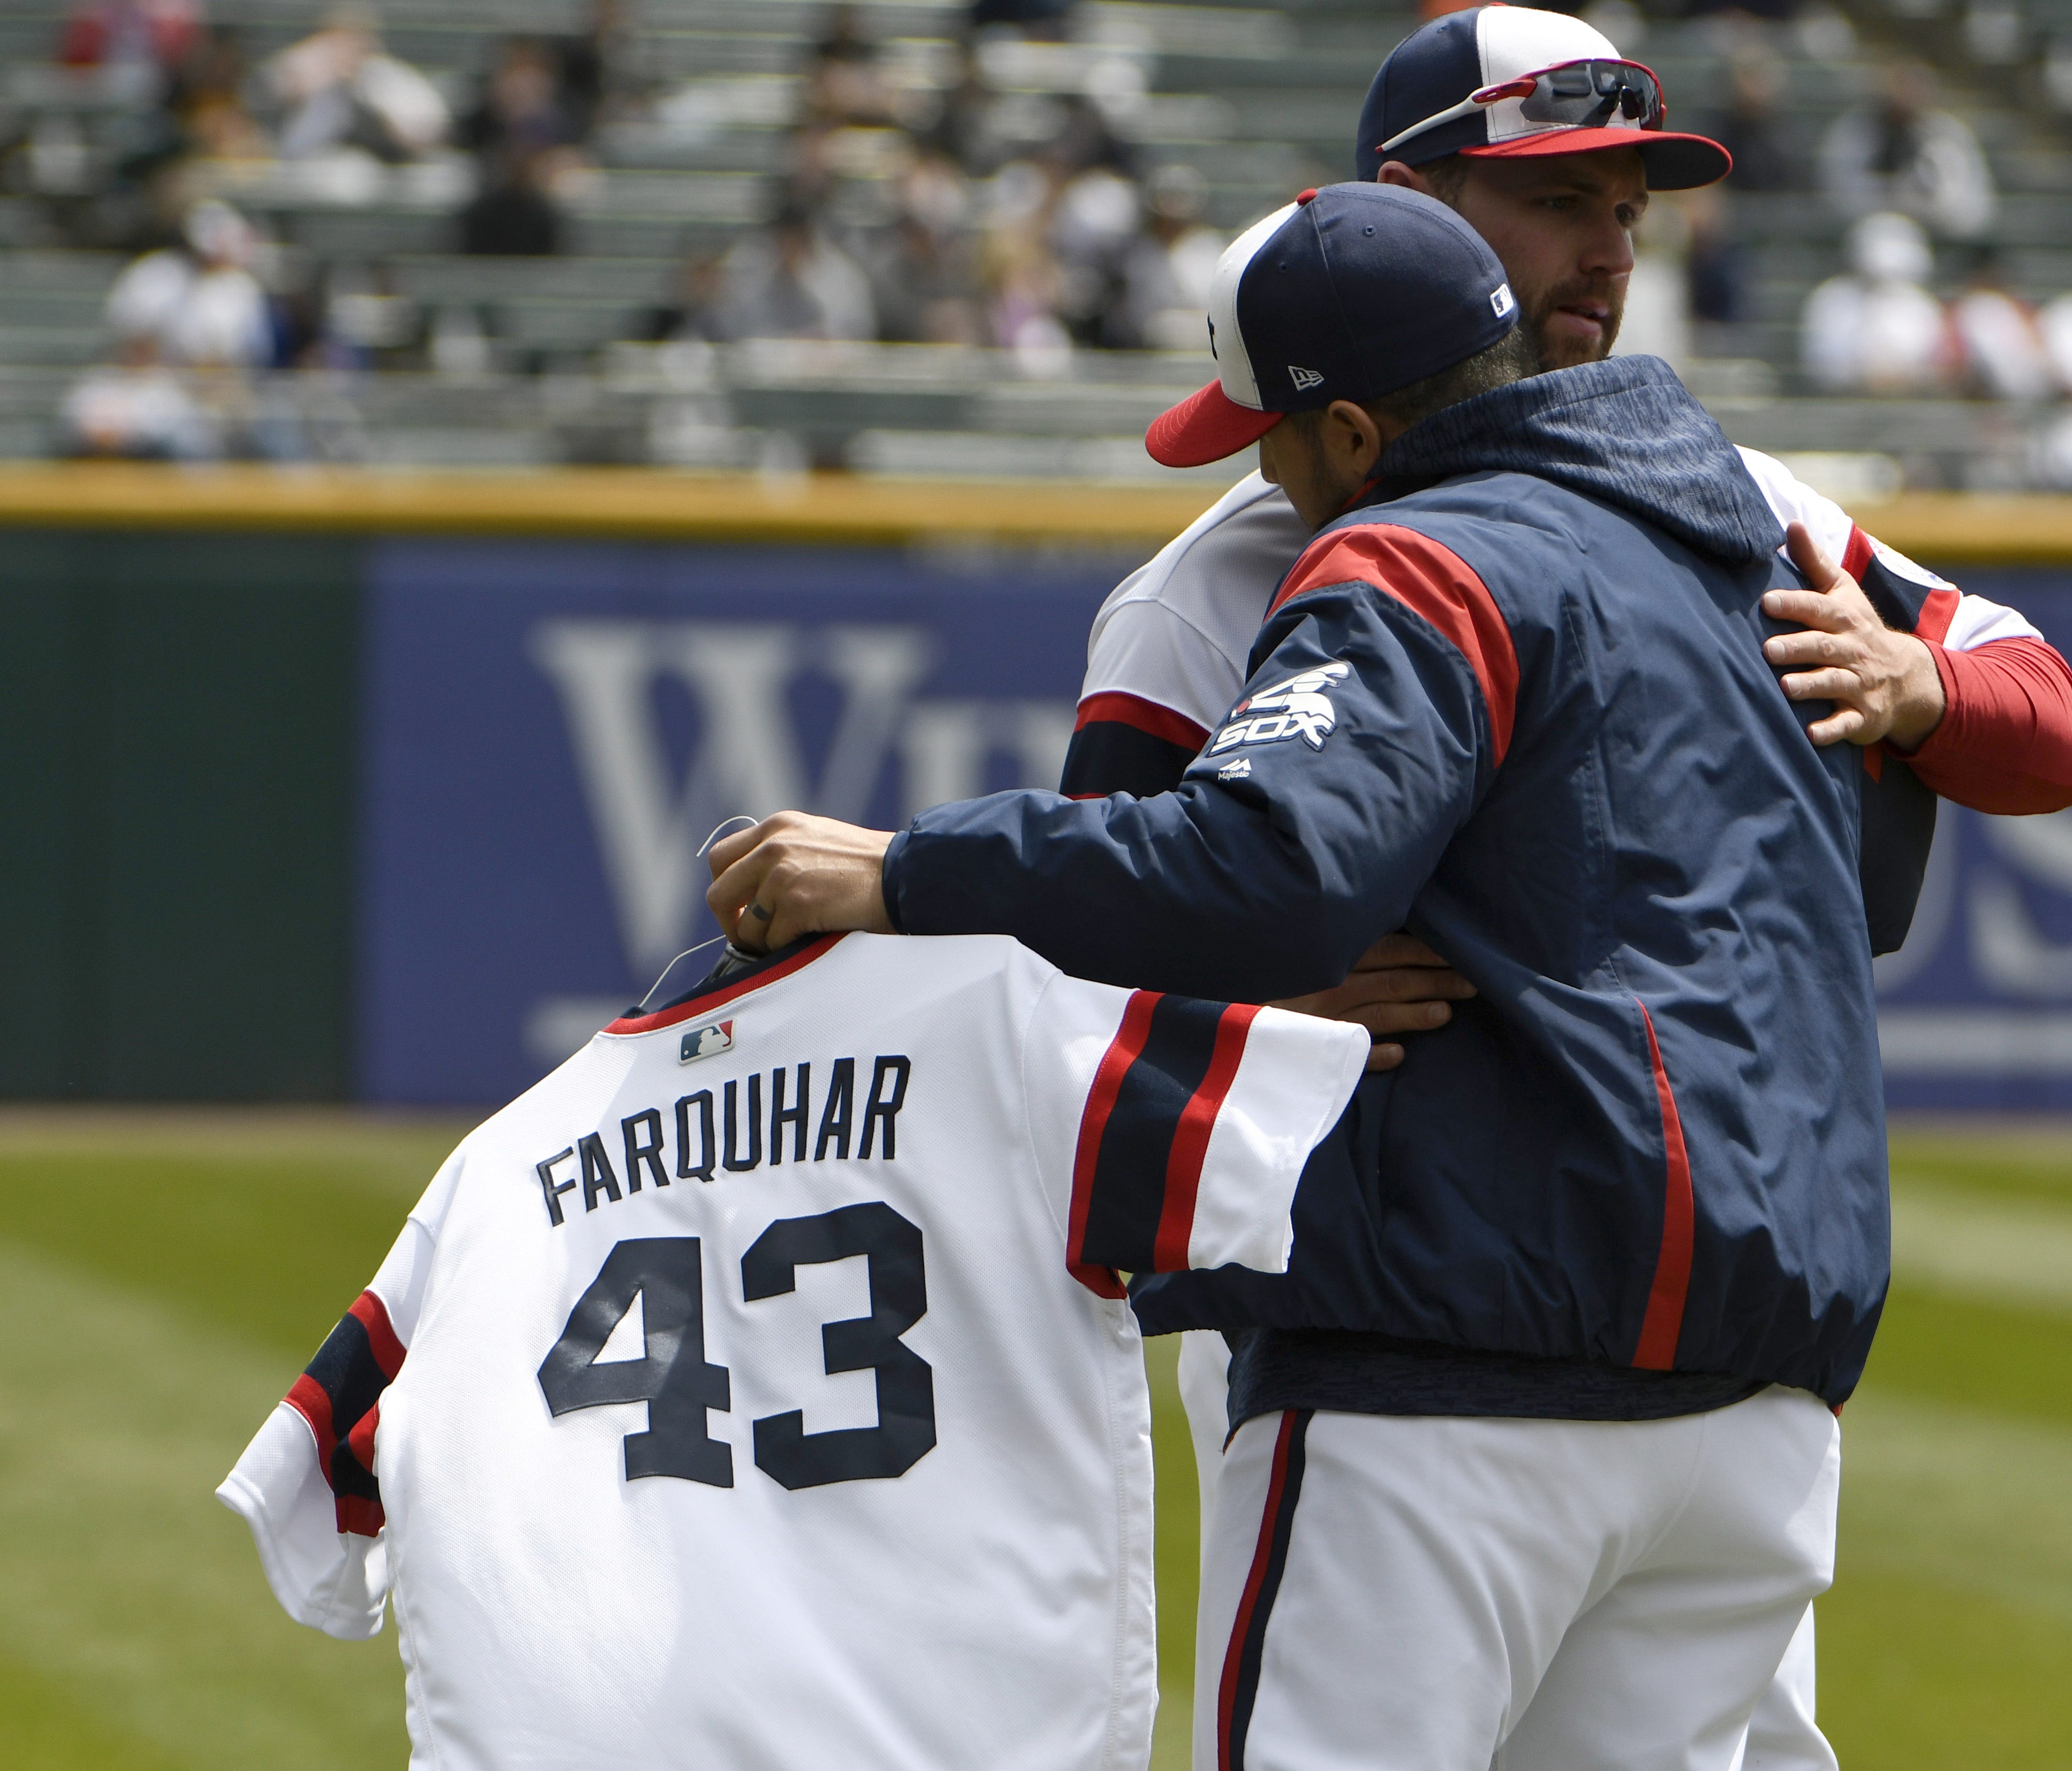 Hector Santiago, left, hugs Chris Volstad as he carries the jersey of Danny Farquhar to the bullpen before Sunday's game against the Astros.